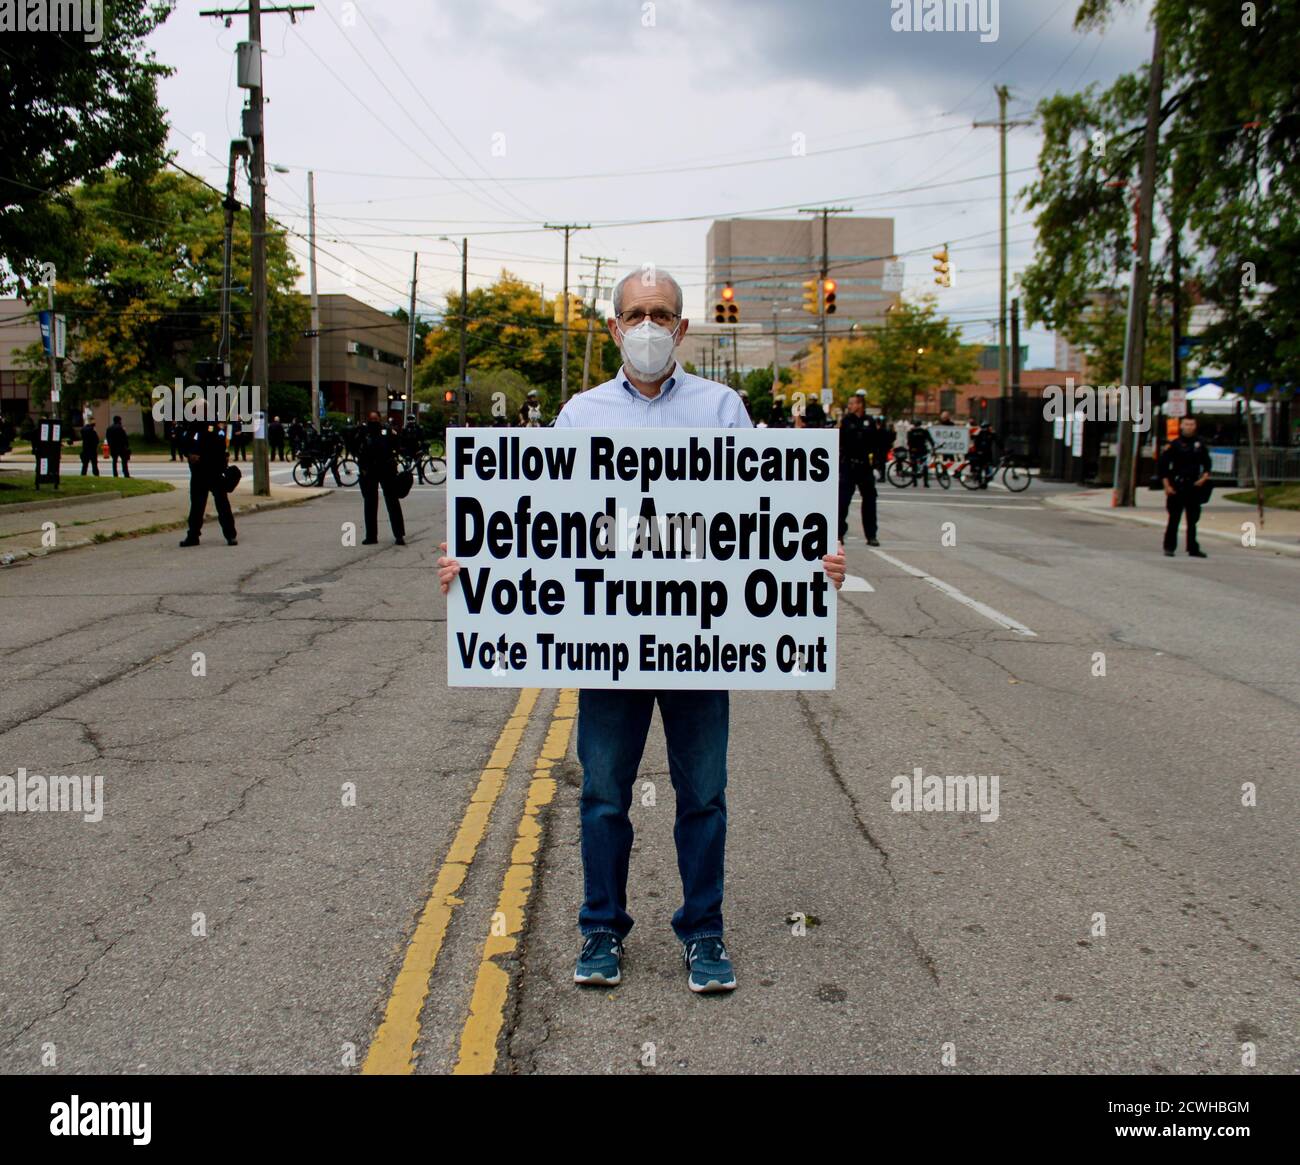 Cleveland, Ohio, USA. 29th Sep, 2020. As ex-VP Biden was due to drive by. This rally-goer with sign saying FELLOW REPUBLICANS DEFEND AMERICA VOTE TRUMP OUT - VOTE TRUMP ENABLERS OUT, had planned on being at the Lagoon where BLM protestors were gathering, but couldn't until the police re-opened the street. He said he had been working up the nerve to come ot protest. Police were blocking the intersections near Case Western Reserve University, in preparation for President Trump and former Vice President Biden's motorcades drive to the Medical Center where they would clash a few hours later in Stock Photo